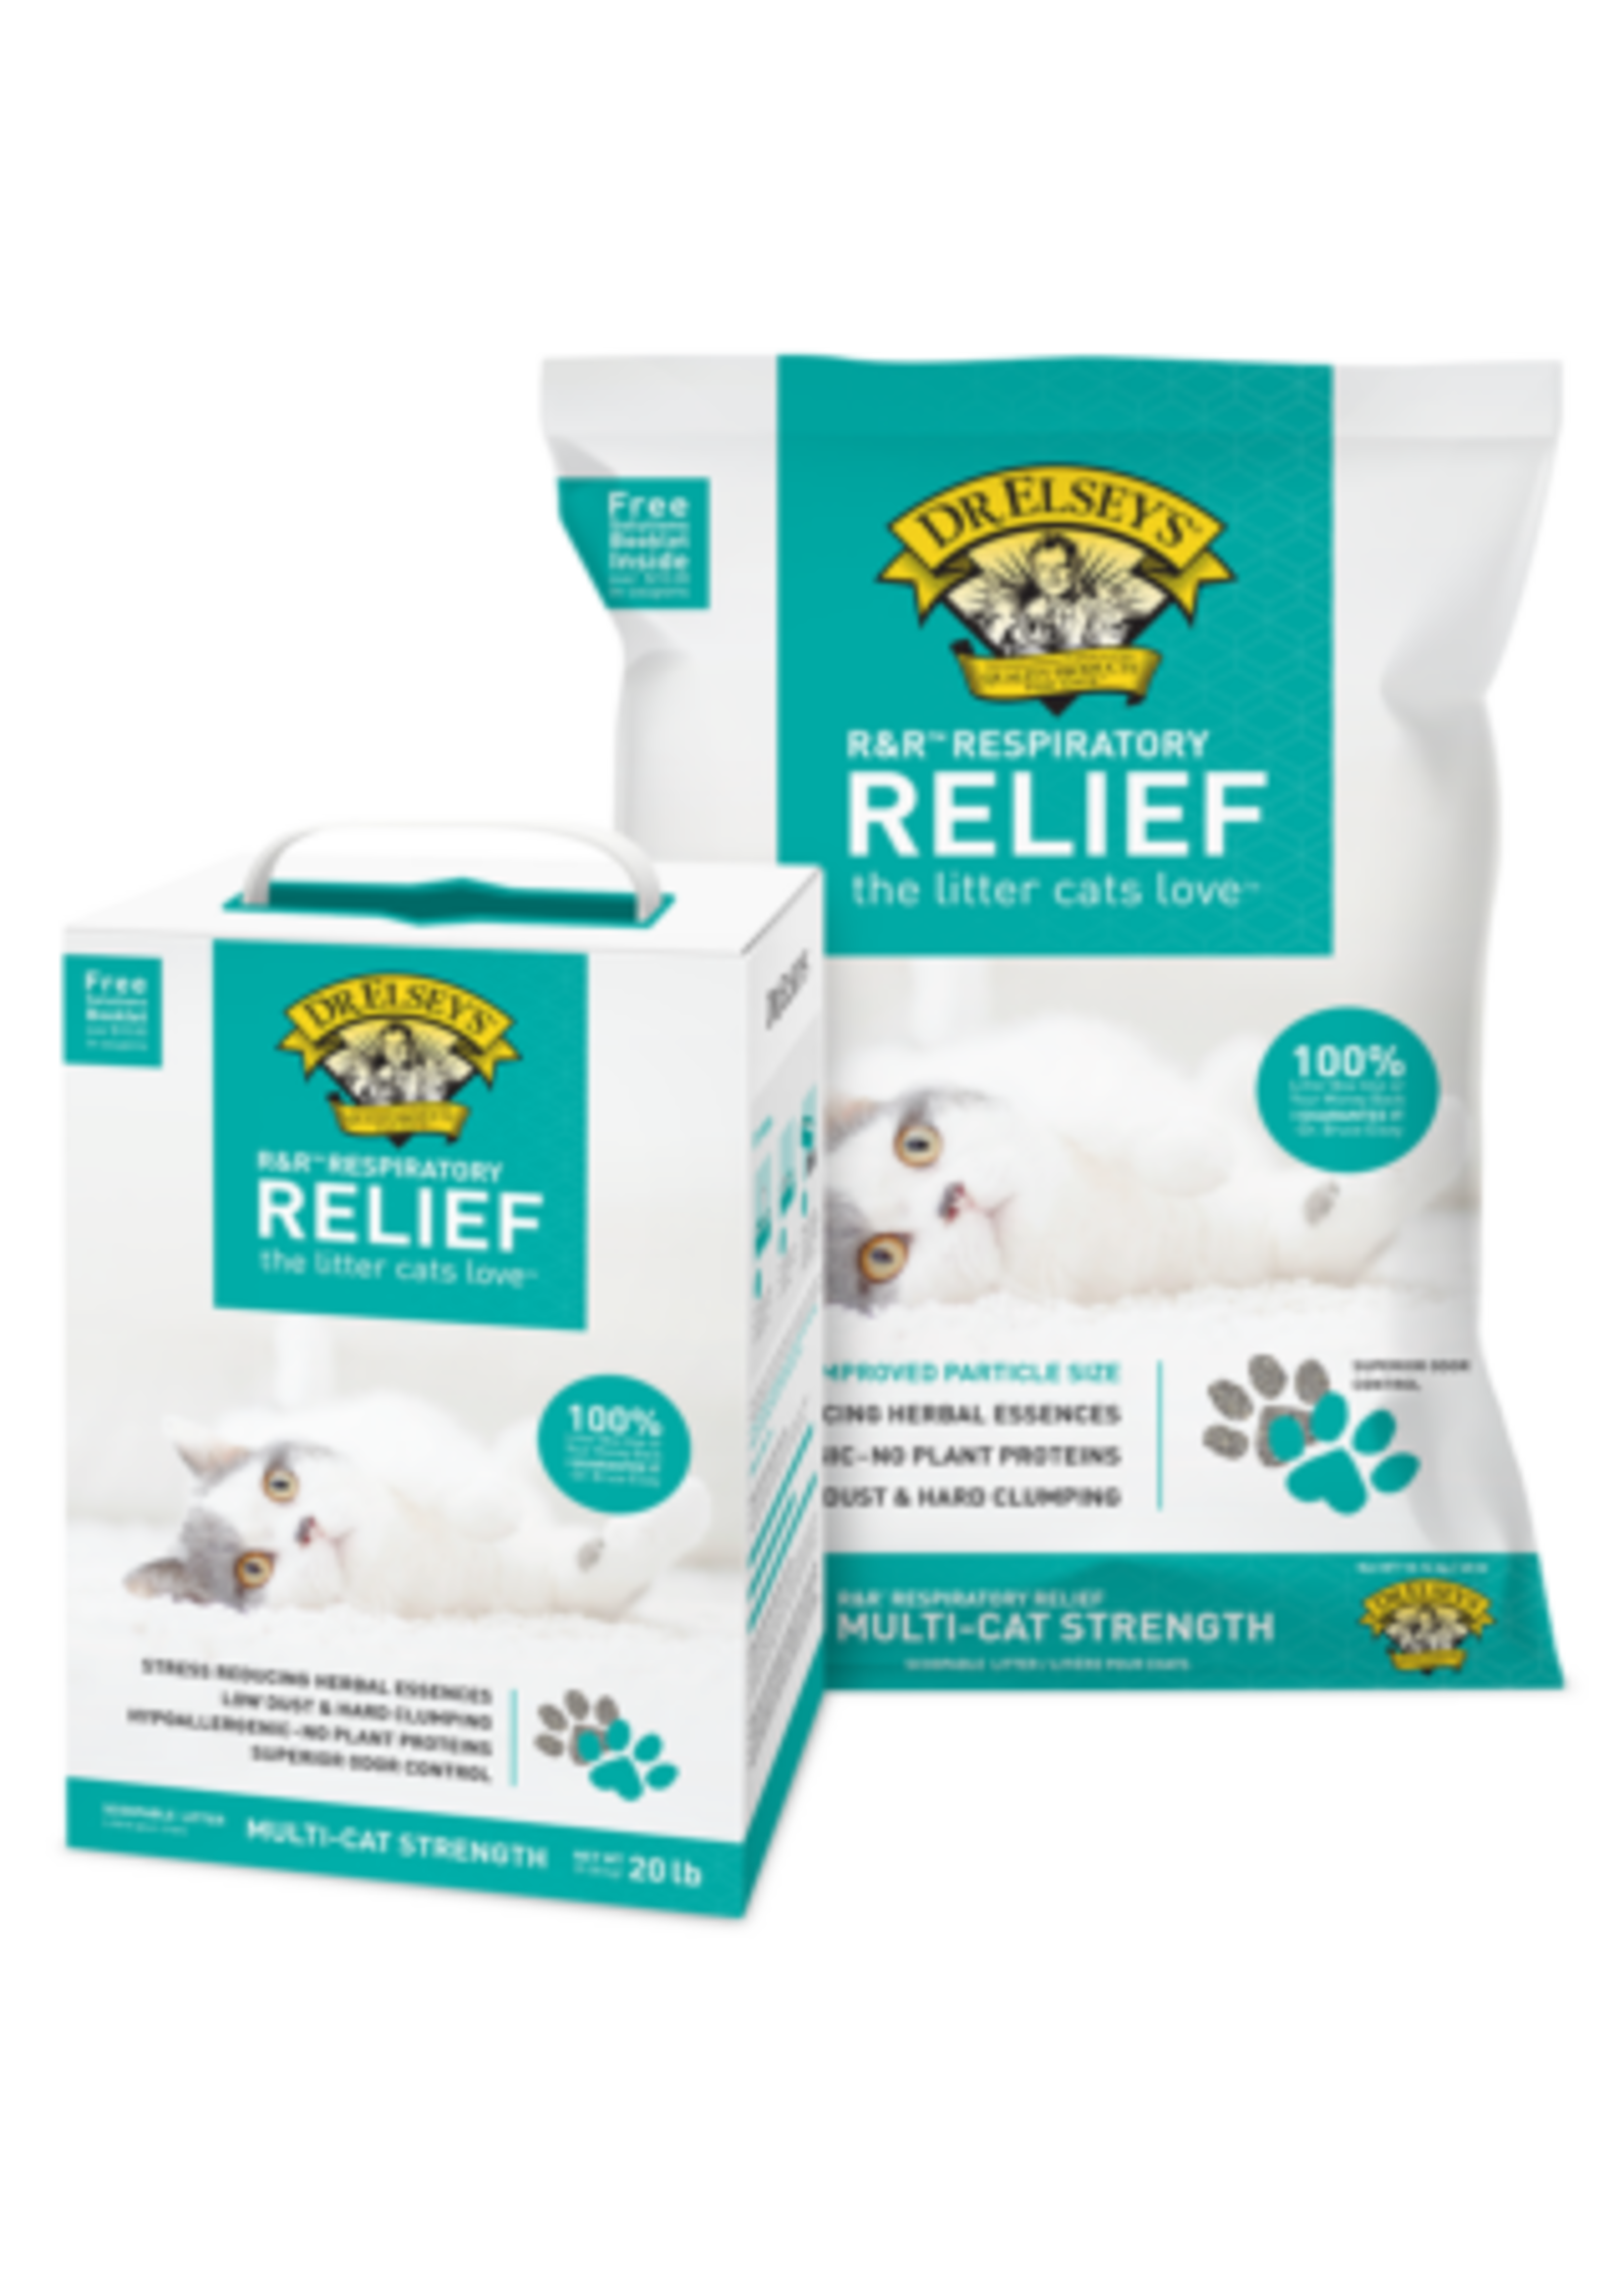 Dr. Elsey's Dr. Elsey's Precious Cat Respiratory Relief Litter